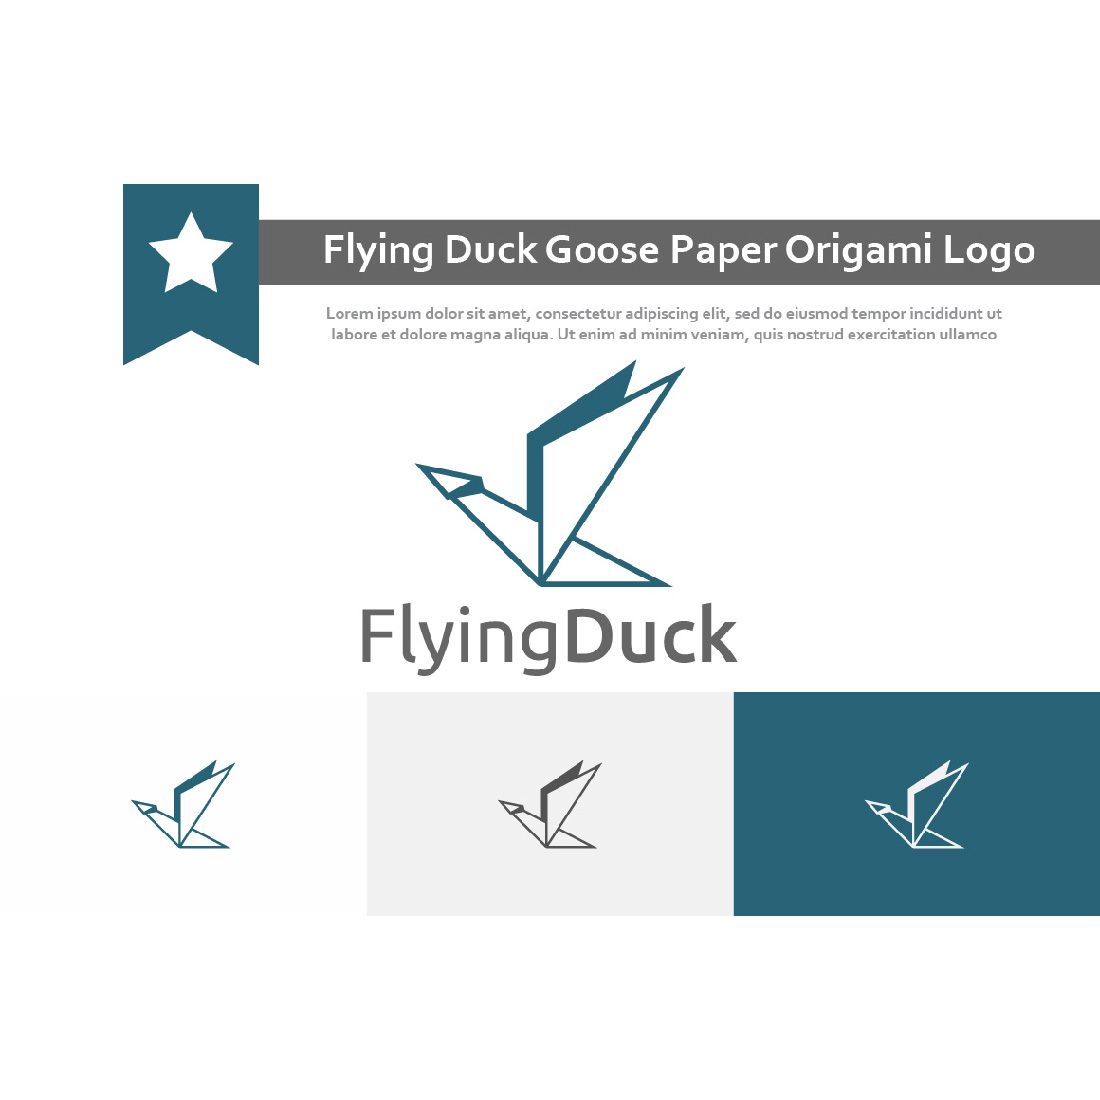 Flying Duck Goose Paper Origami Style Line Logo cover image.